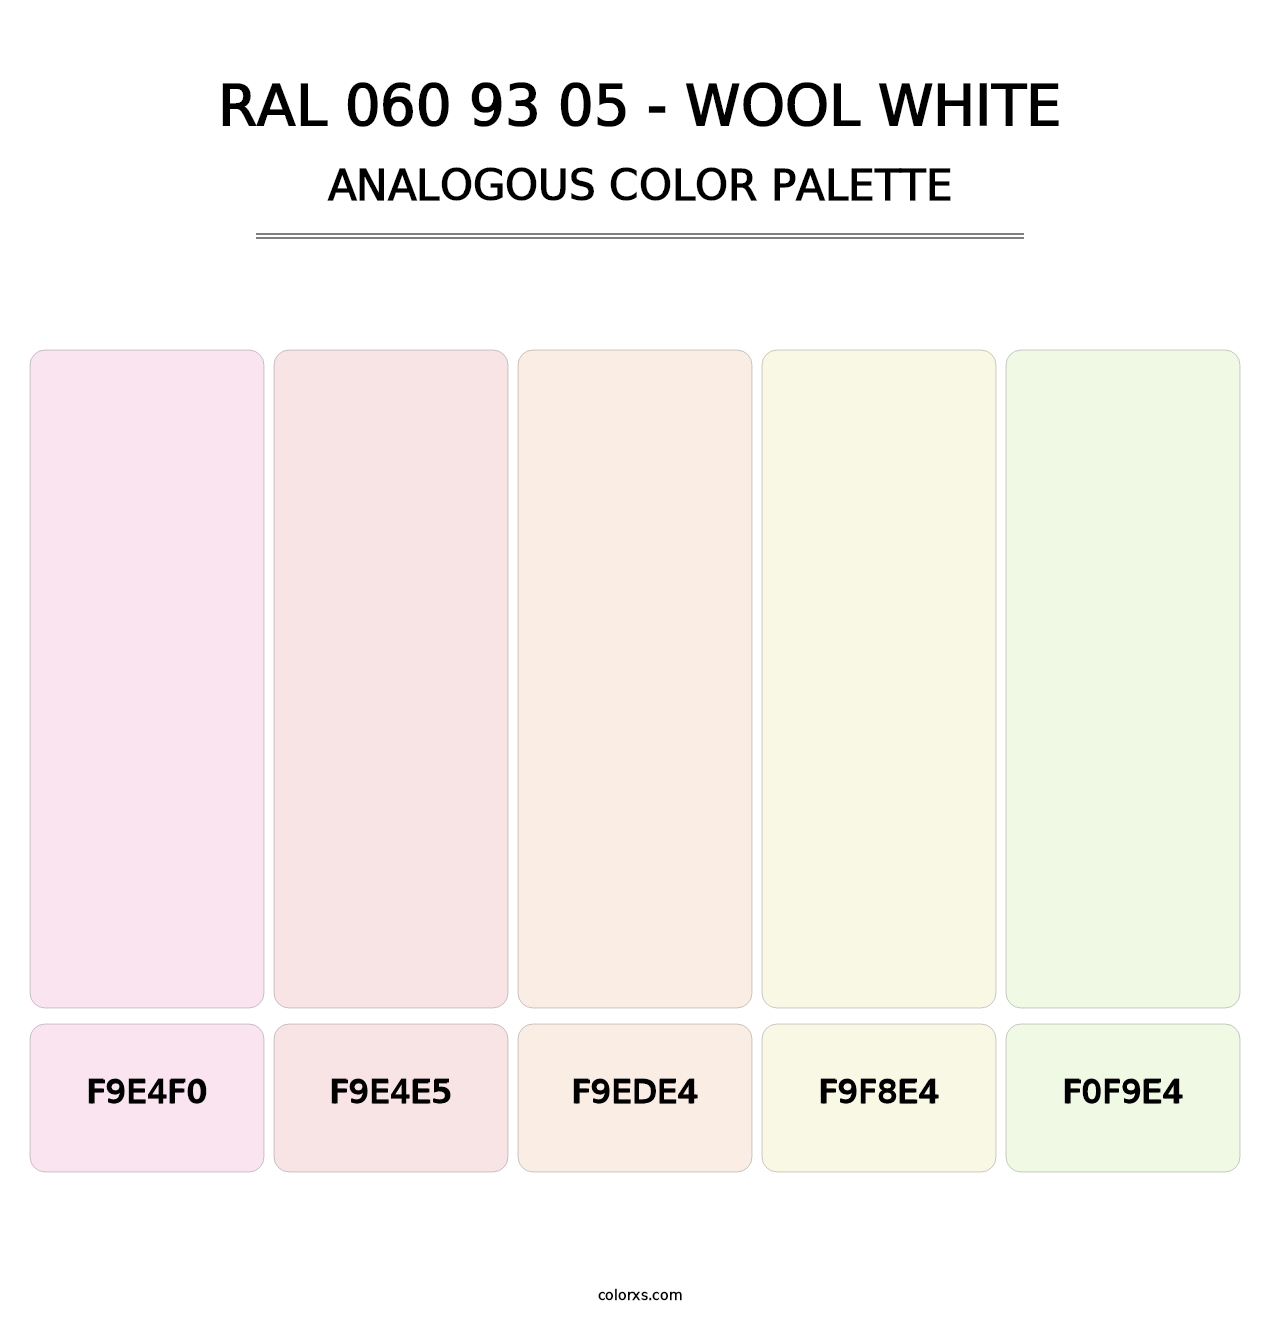 RAL 060 93 05 - Wool White - Analogous Color Palette